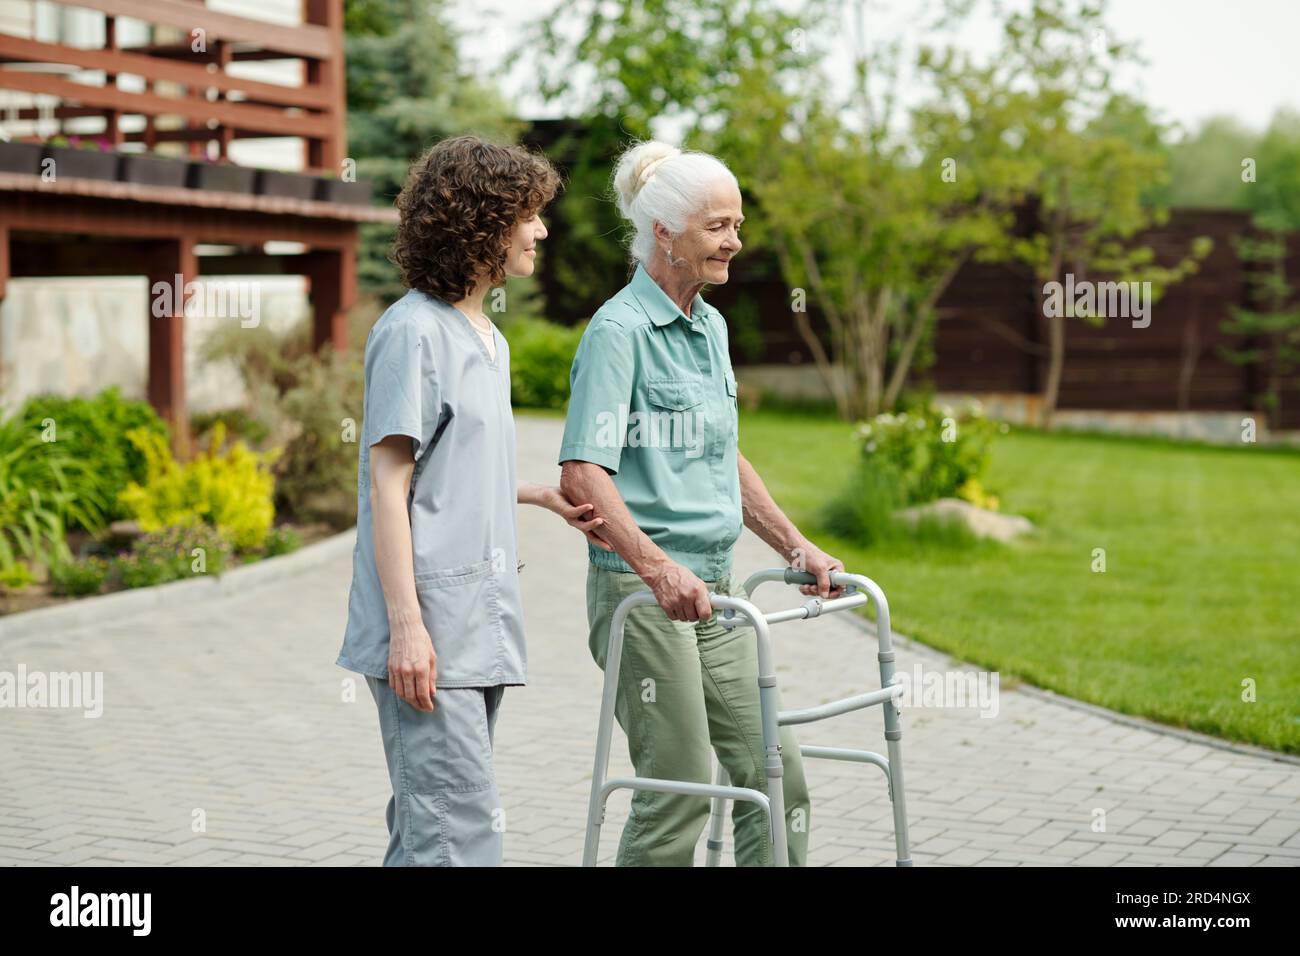 Young caregiver supporting hand of senior patient of retirement home using walker during stroll in the garden with green lawns and trees Stock Photo